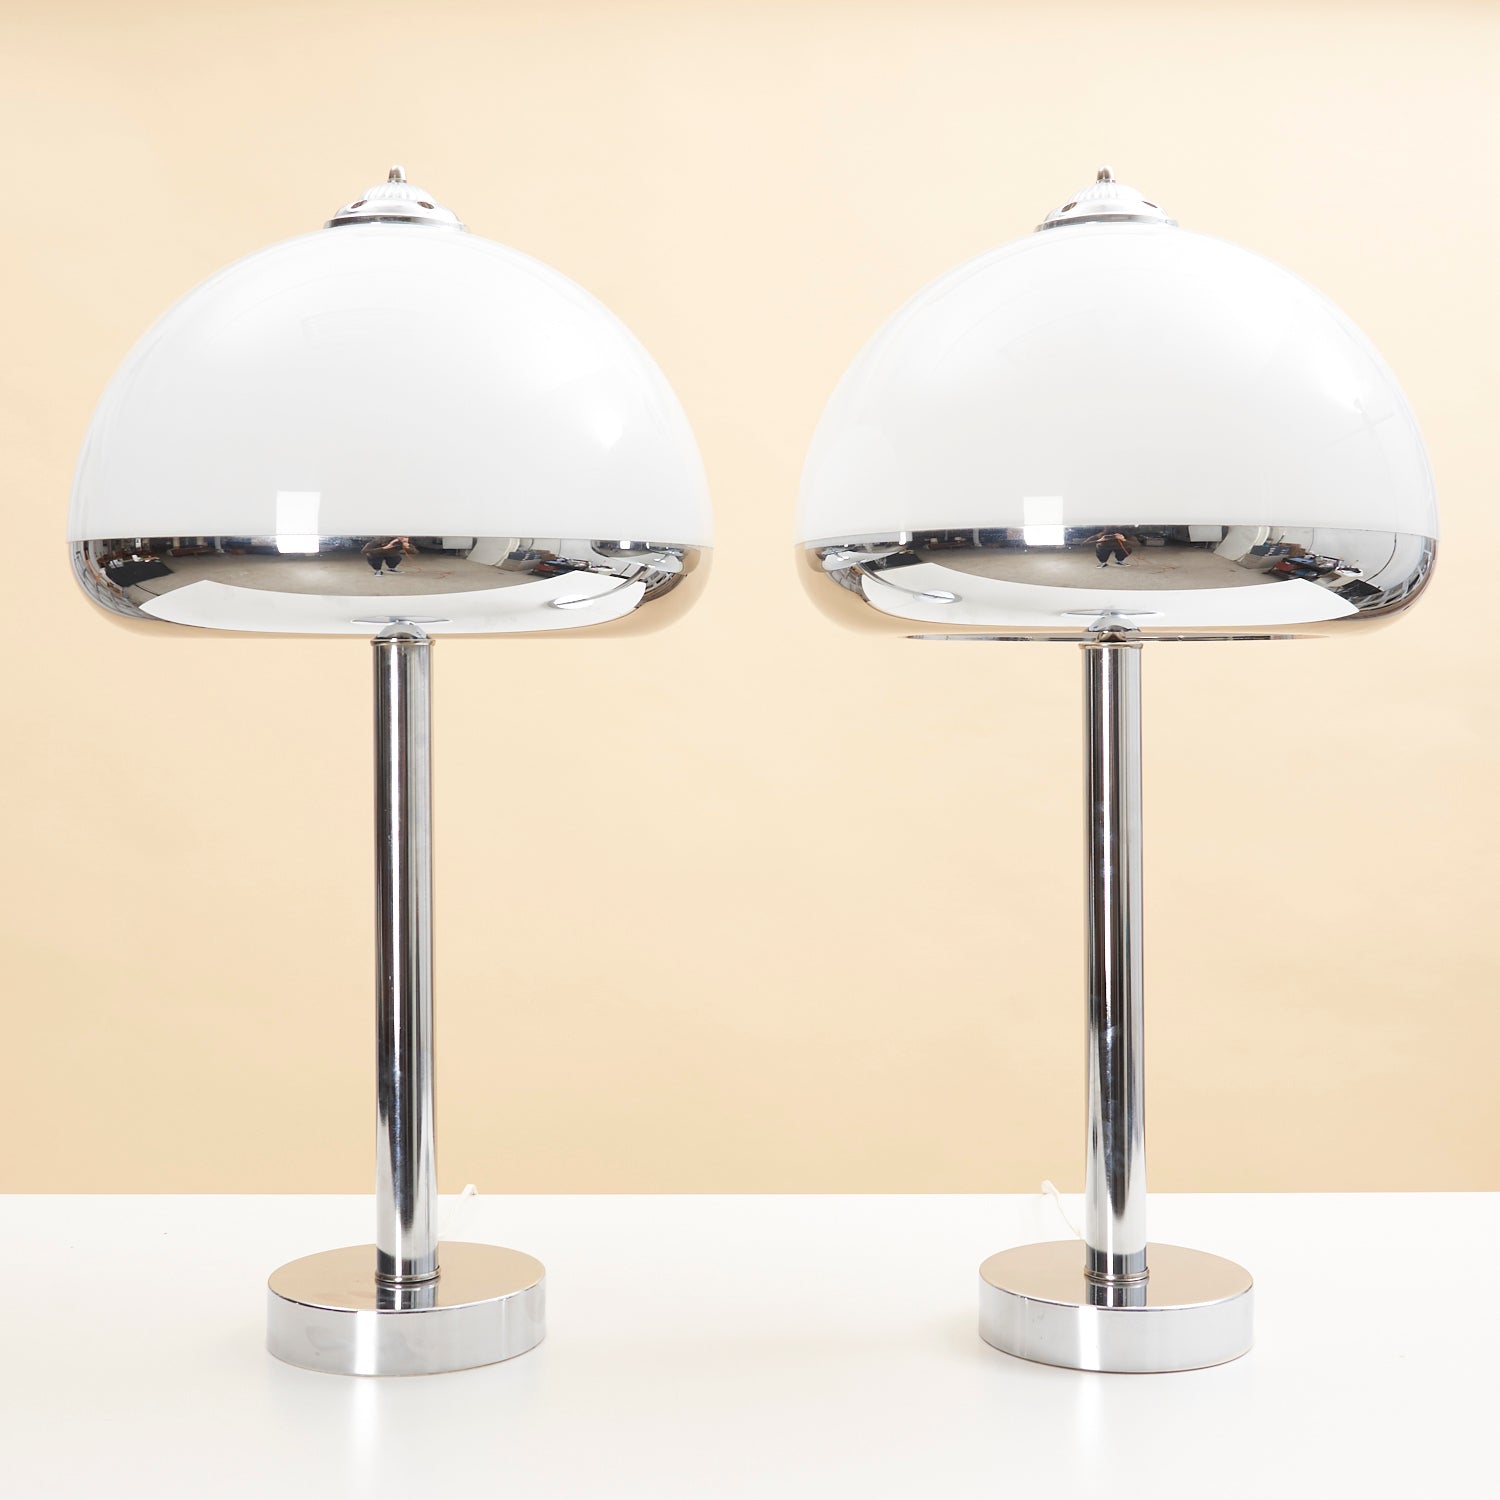 Pair of Vintage Chrome Table Lamps w/ Acrylic Shades